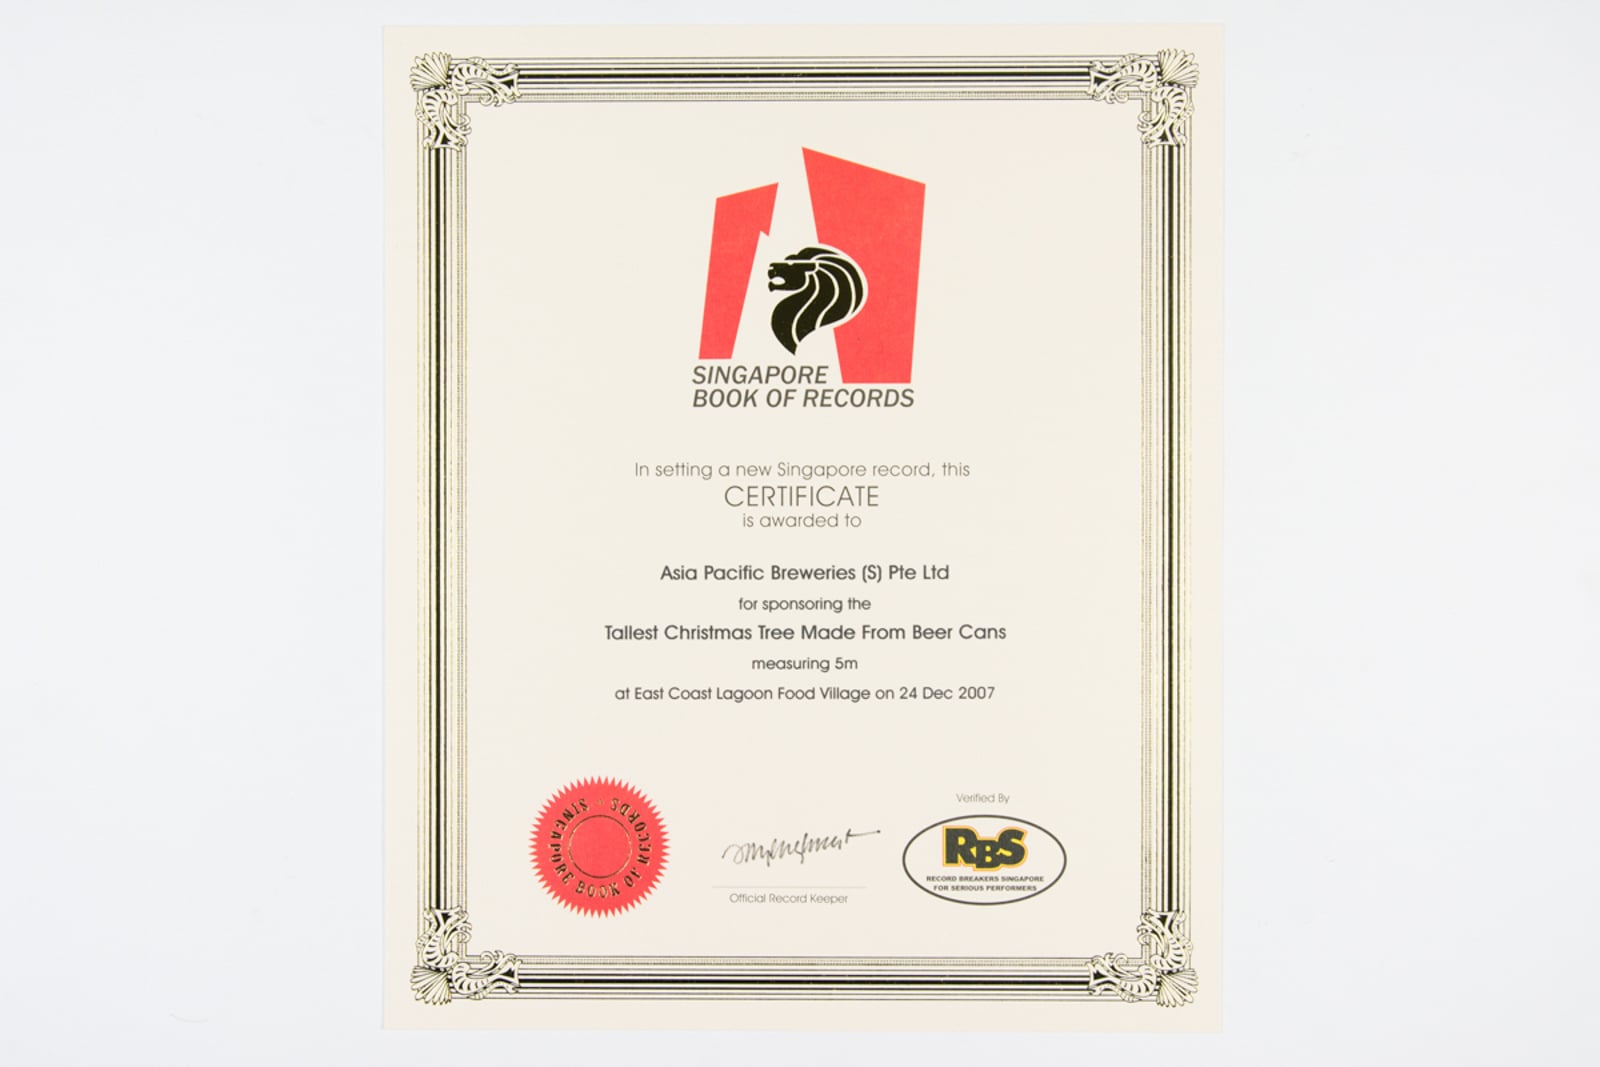 APBS - Singapore Book of Records Certificate 2007